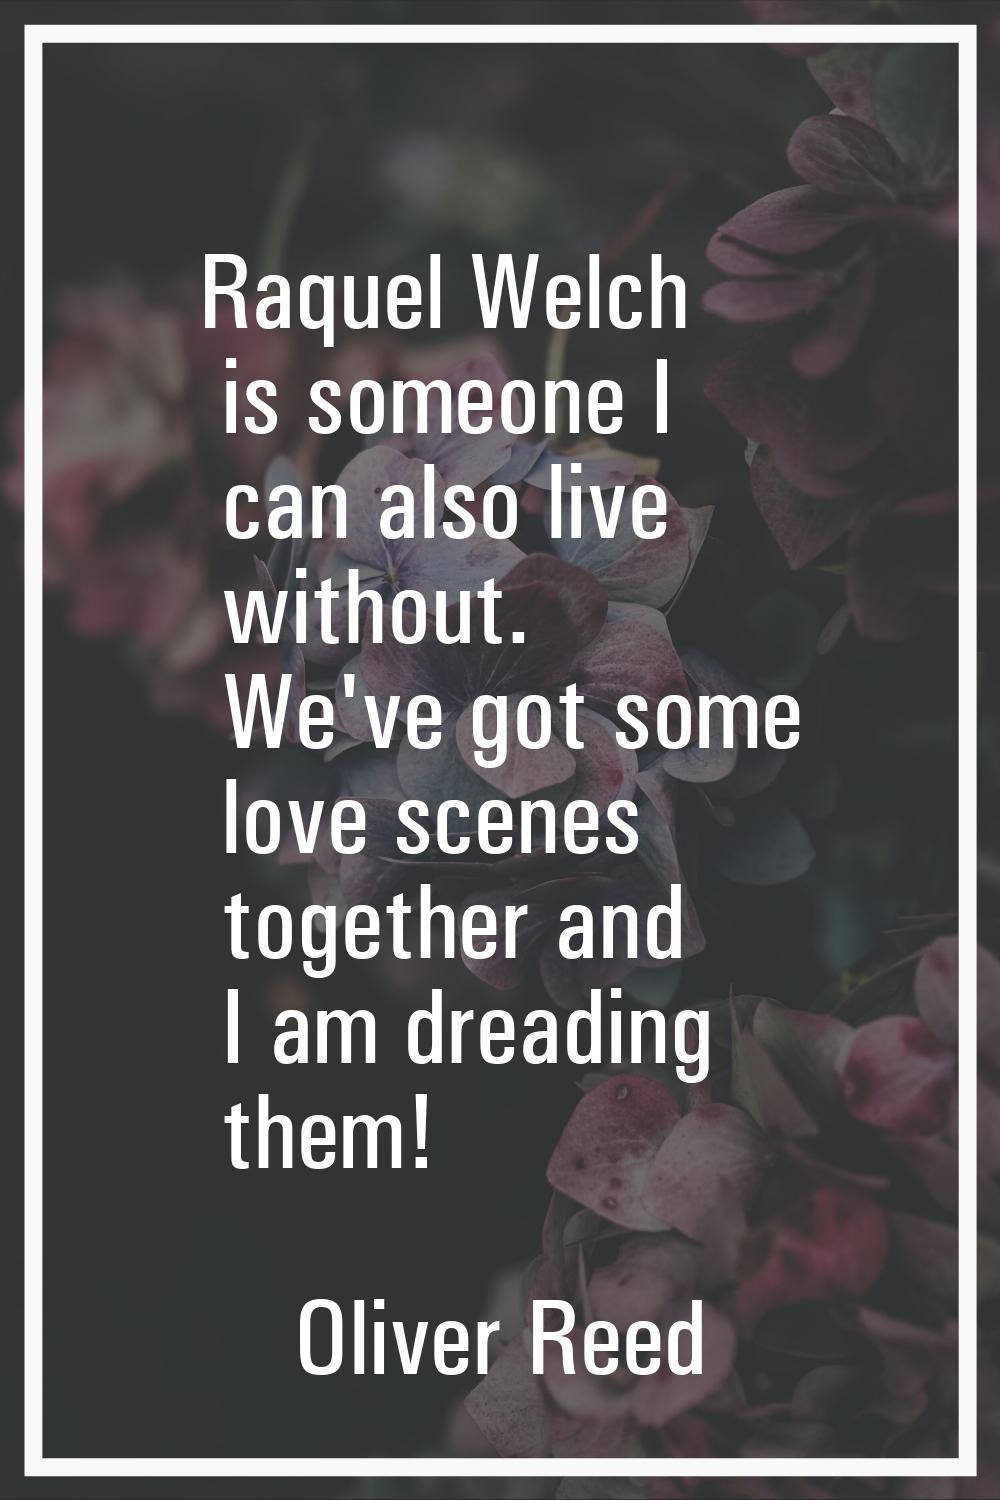 Raquel Welch is someone I can also live without. We've got some love scenes together and I am dread